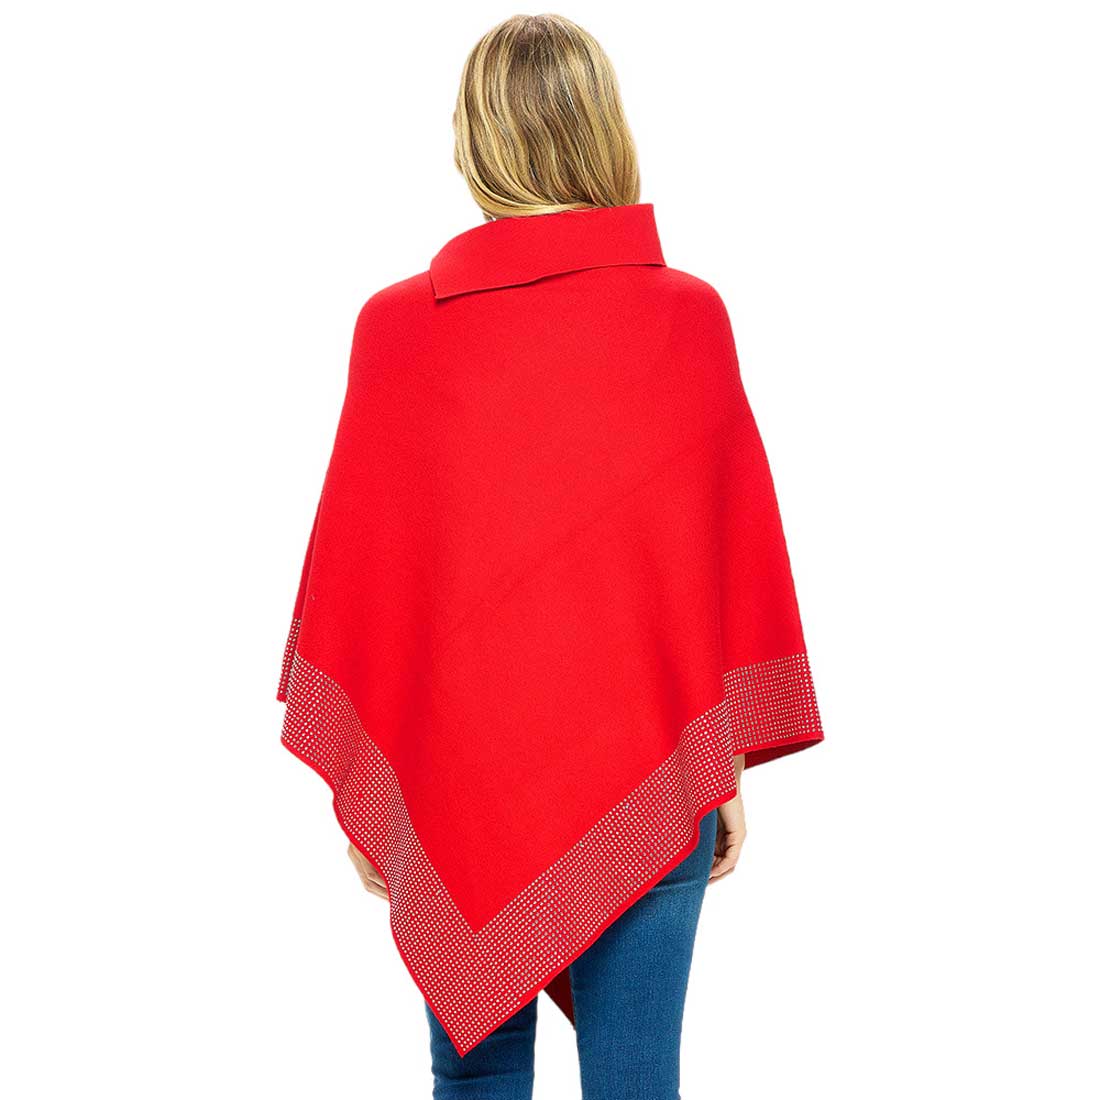 Red Bling Border Solid Neck Poncho, with the latest trend in ladies' outfit cover-up! the high-quality knit neck poncho is soft, comfortable, and warm but lightweight. Stay protected from the chilly weather while taking your elegant looks to a whole new level with an eye-catching, luxurious casual outfit for women!